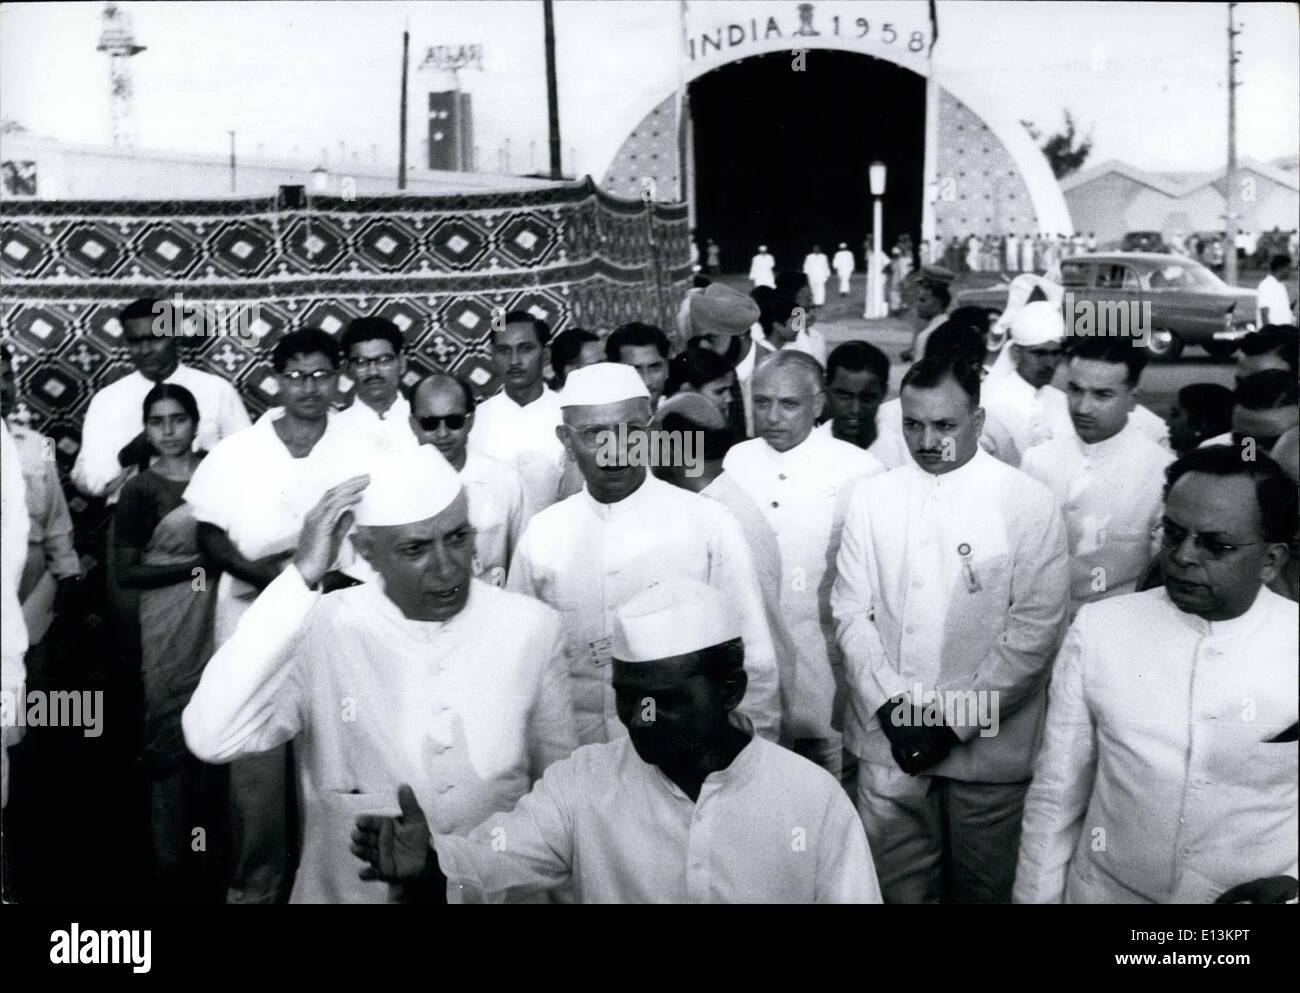 Mar. 02, 2012 - Mr. Nehru opens the India 1958 exhibition. Mr. Nehru seen touring the India 1958 exhibition opened which he in New Delhi this week, behind him (wearing Gandhi cap) is Mr. Desai the Indian Minister of Finance. Stock Photo